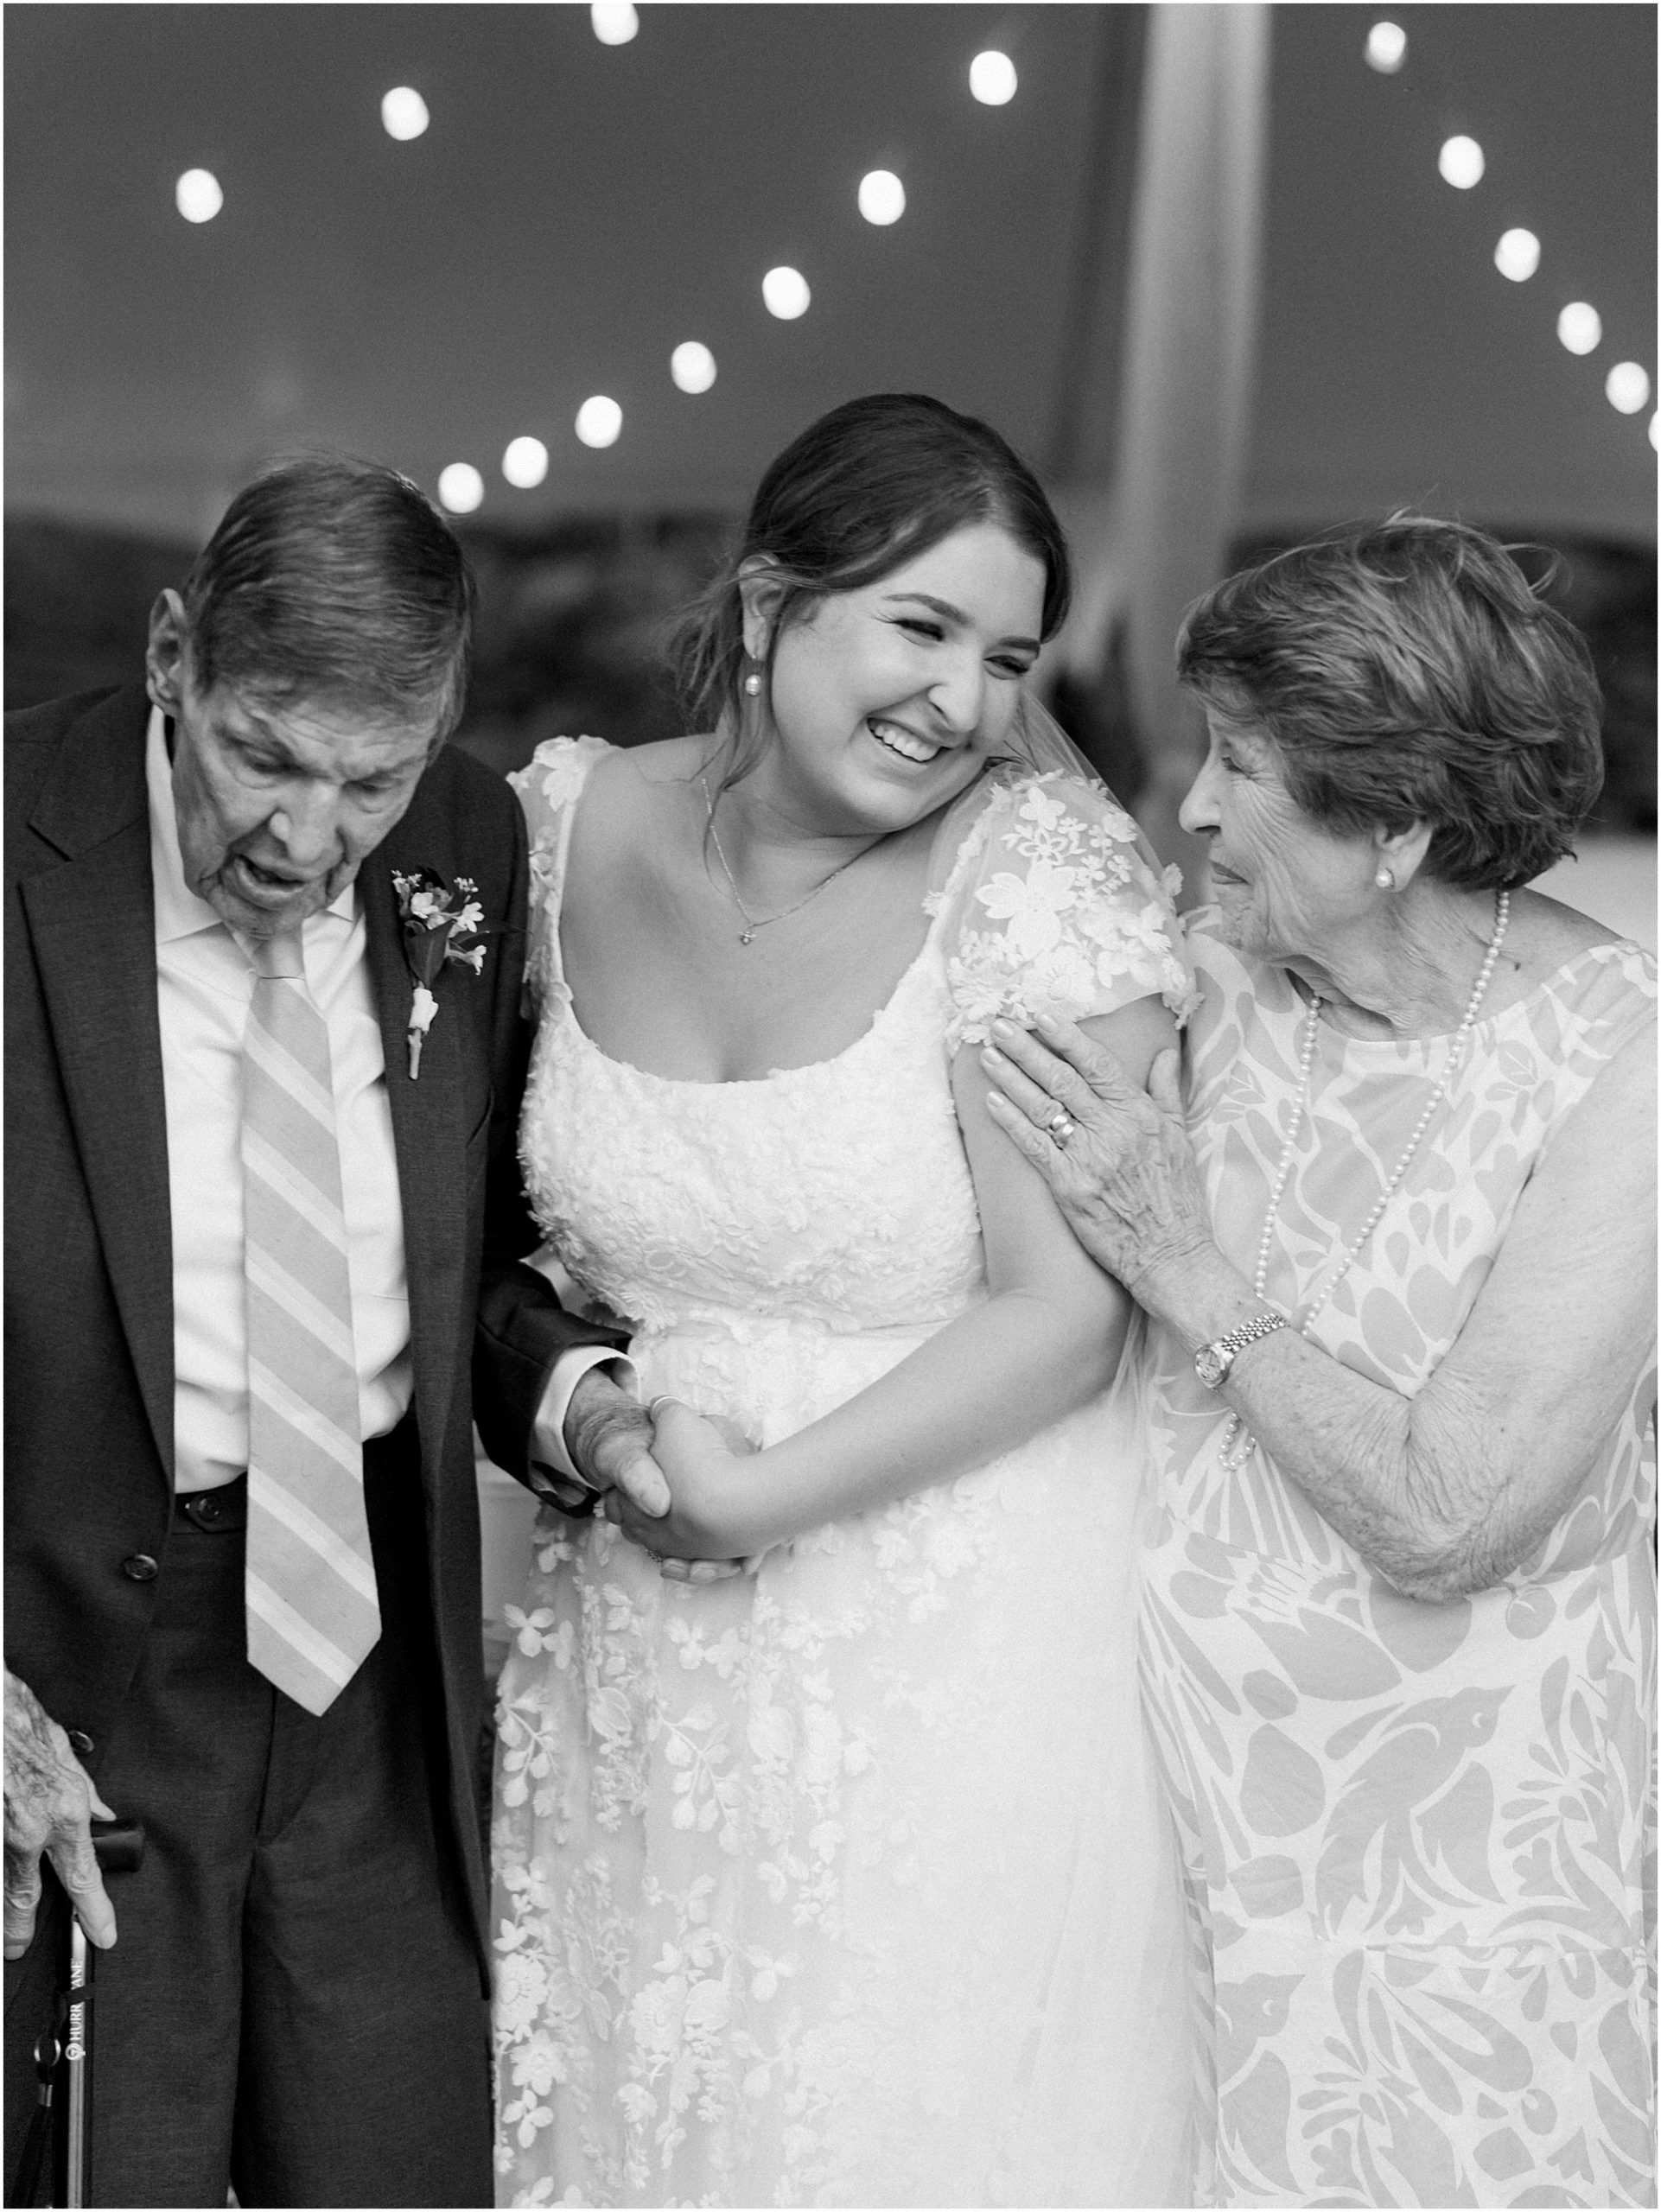 Bride with her family in black and white.